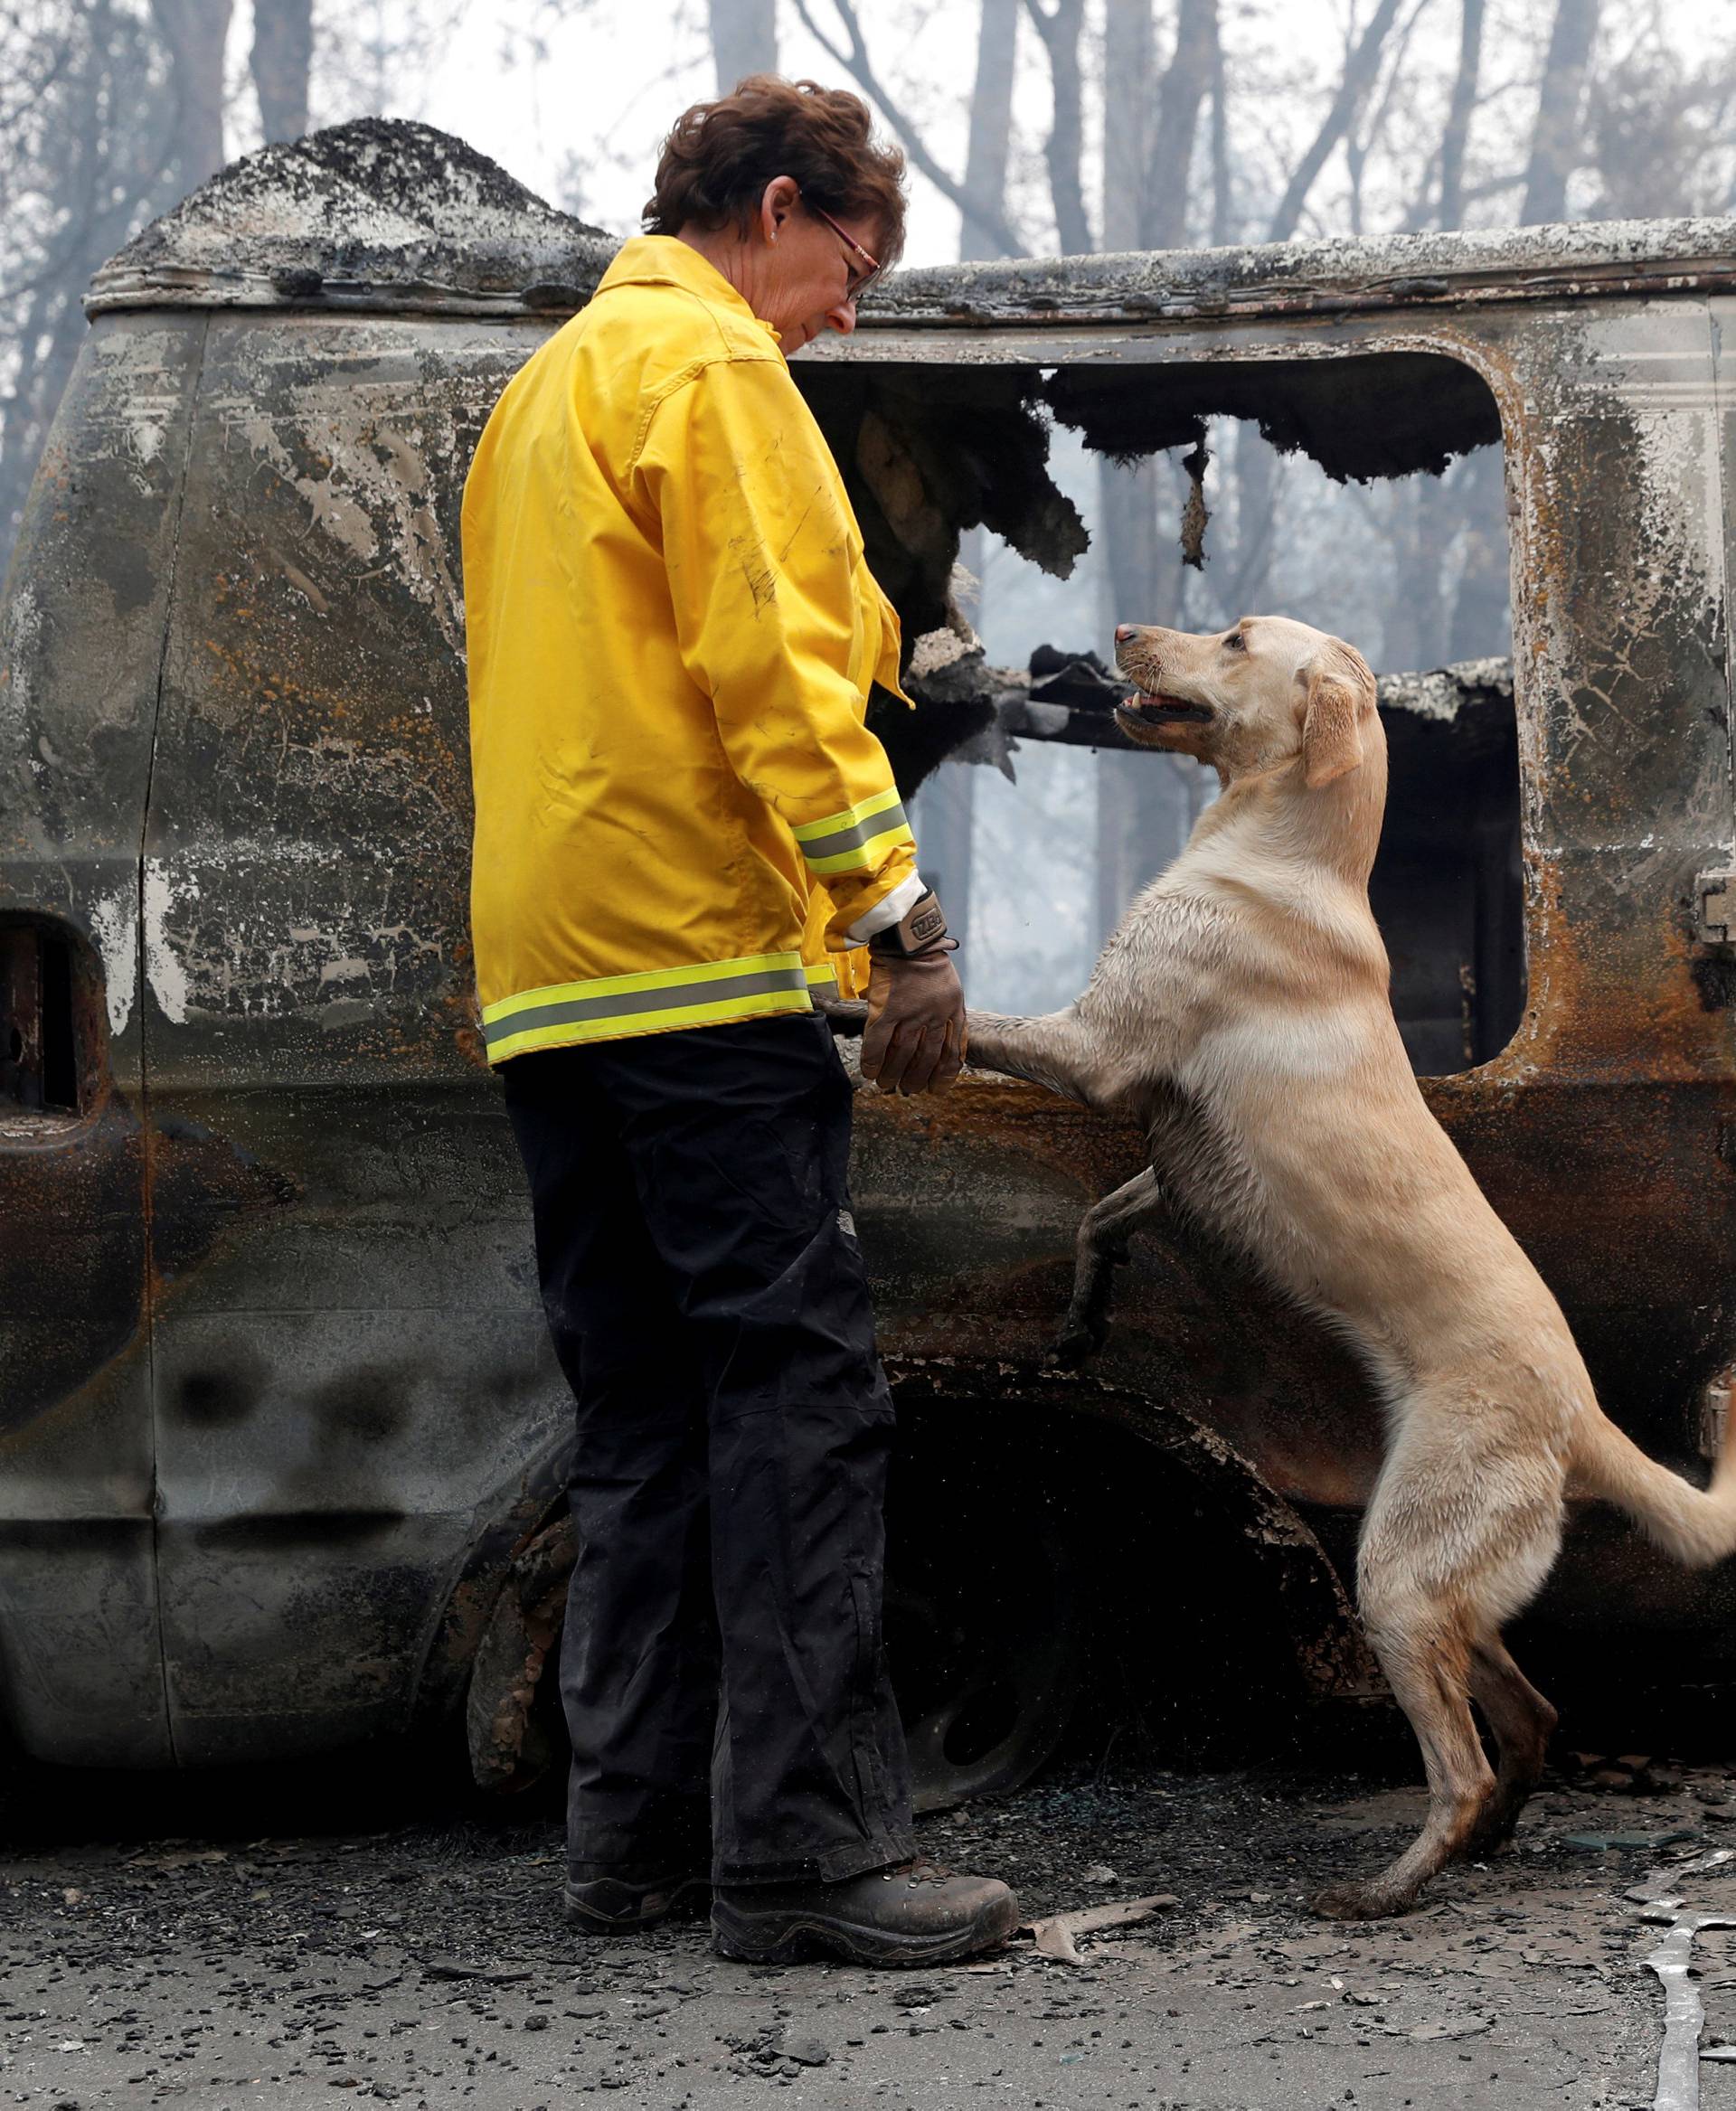 Atkinson searches for human remains with her cadaver dog in a van destroyed by the Camp Fire in Paradise